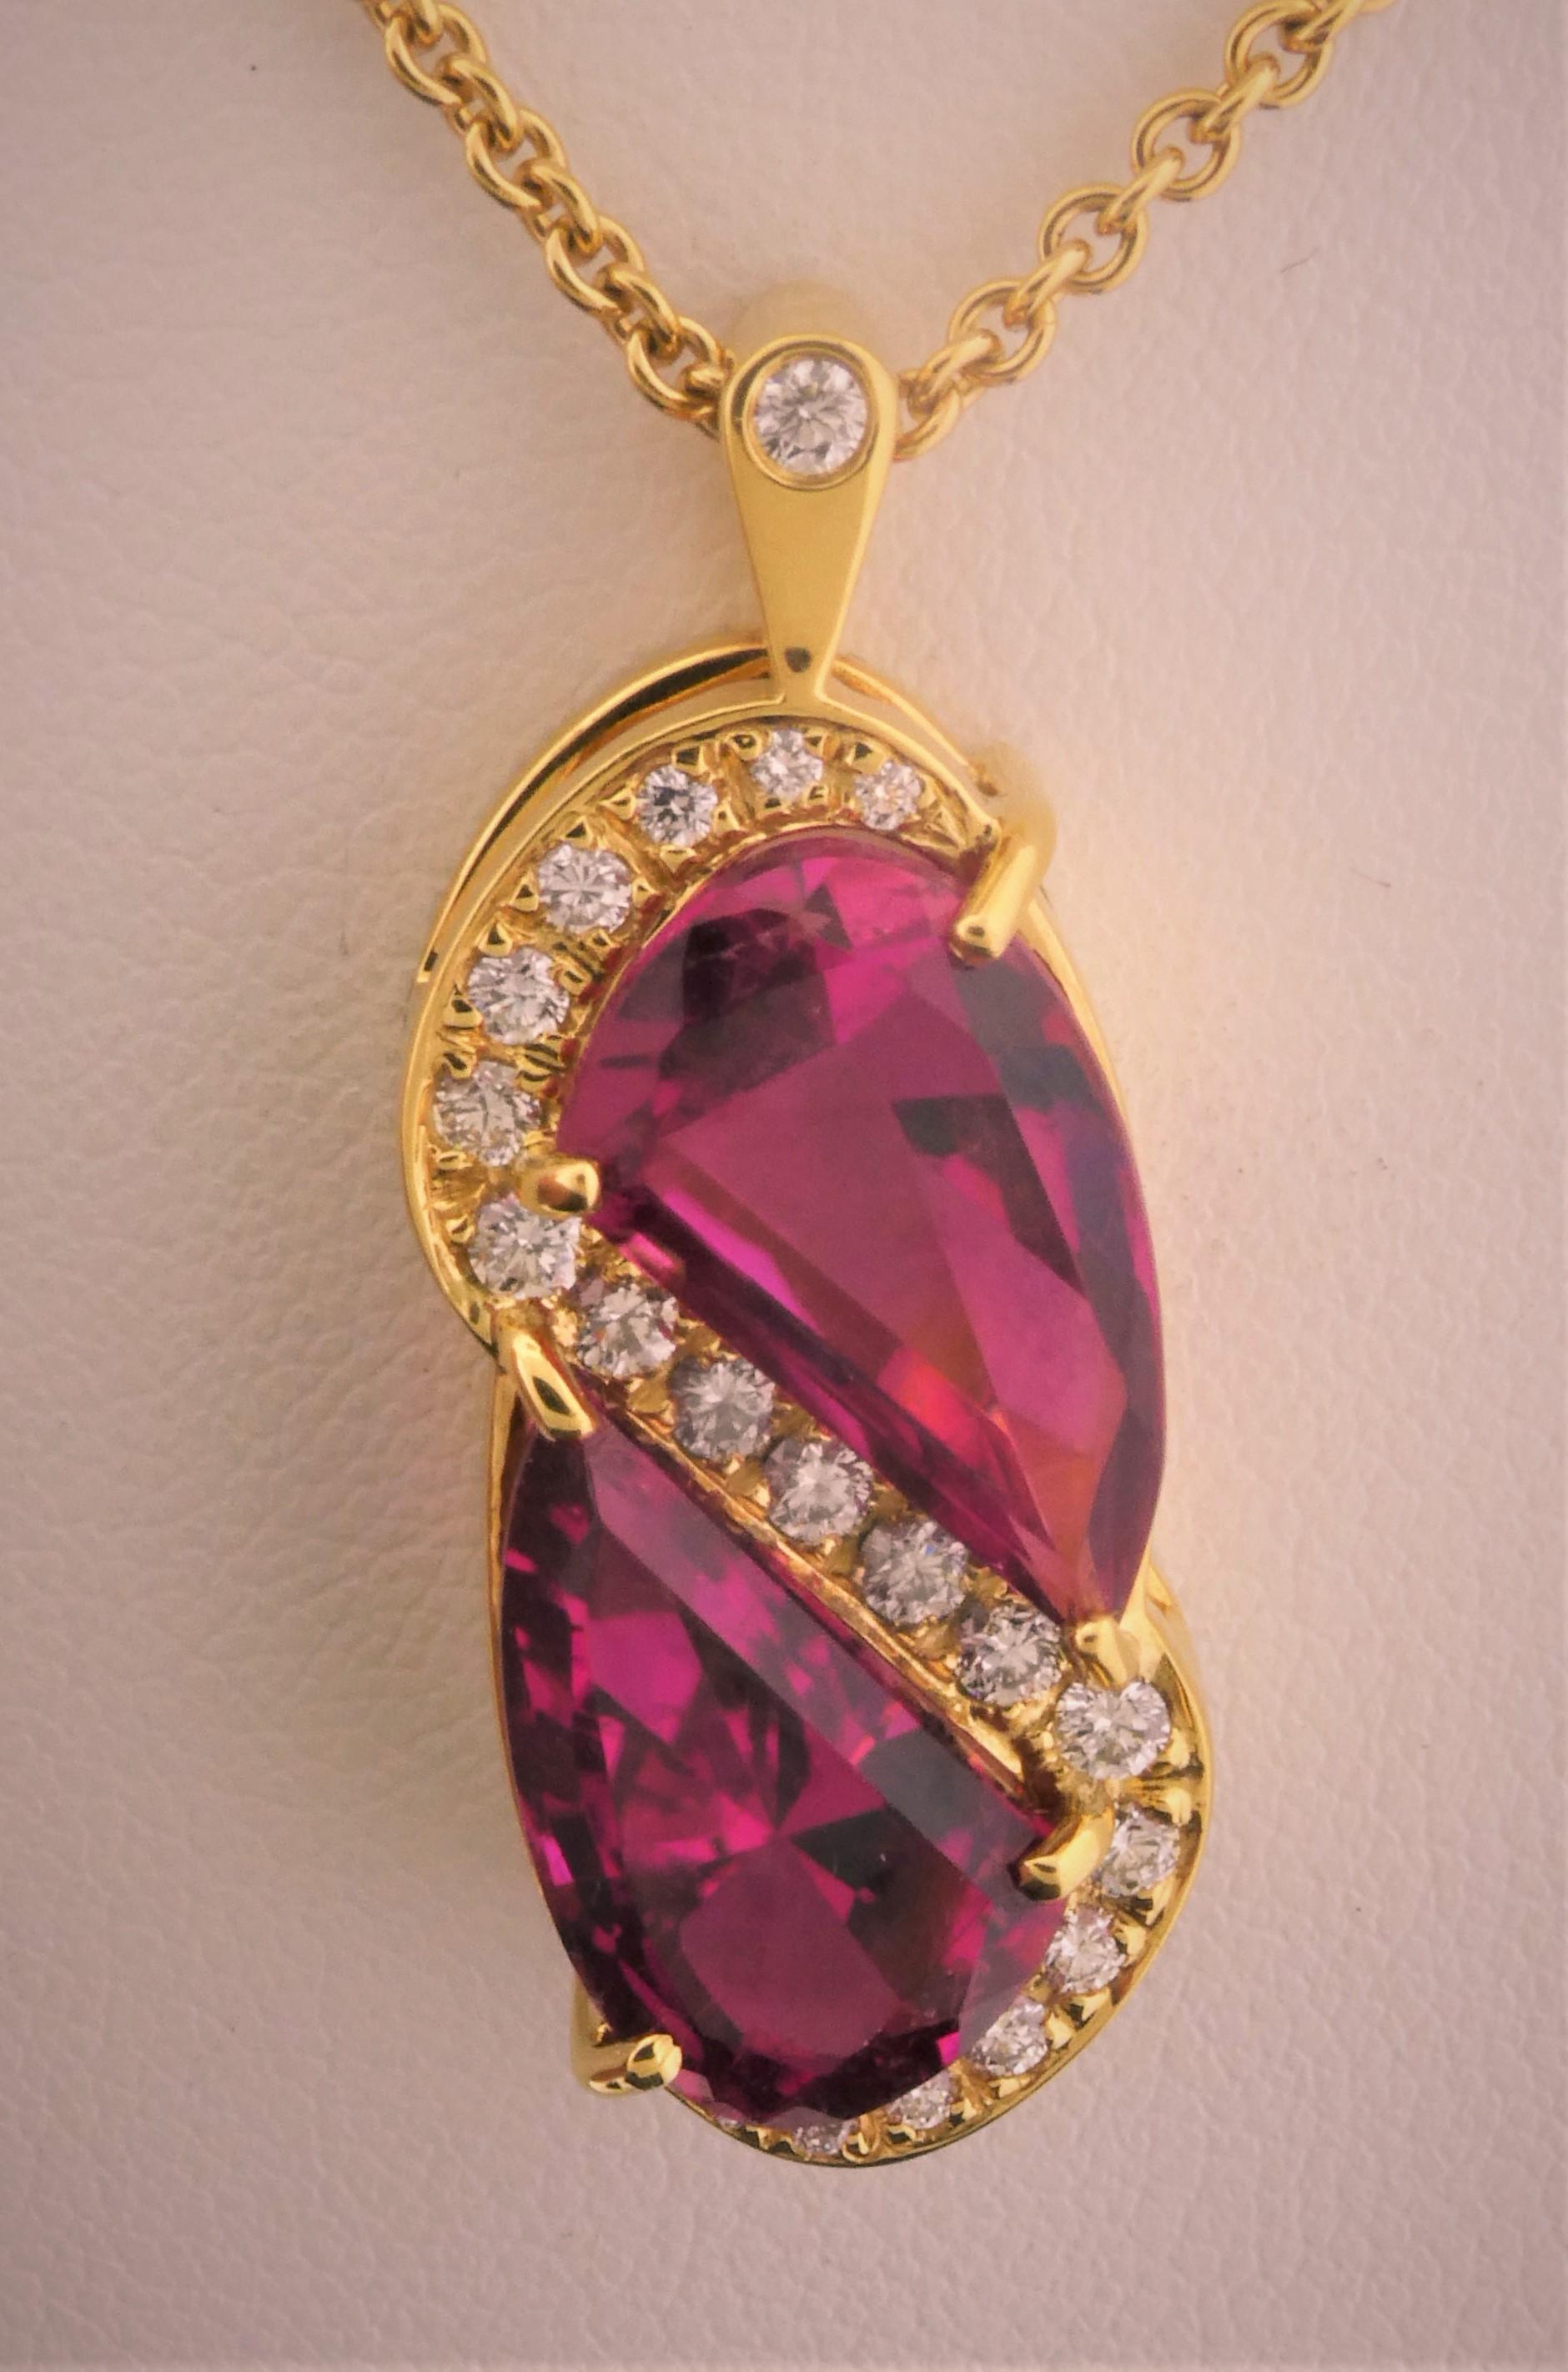 I can only take credit for the design of the pendant, but mother nature has brought forth this remarkable pair of Fuchsia color Tourmalines that weigh 11.40 carats and are completely clean.  Nestled in an 18 Karat yellow gold mounting with a spray